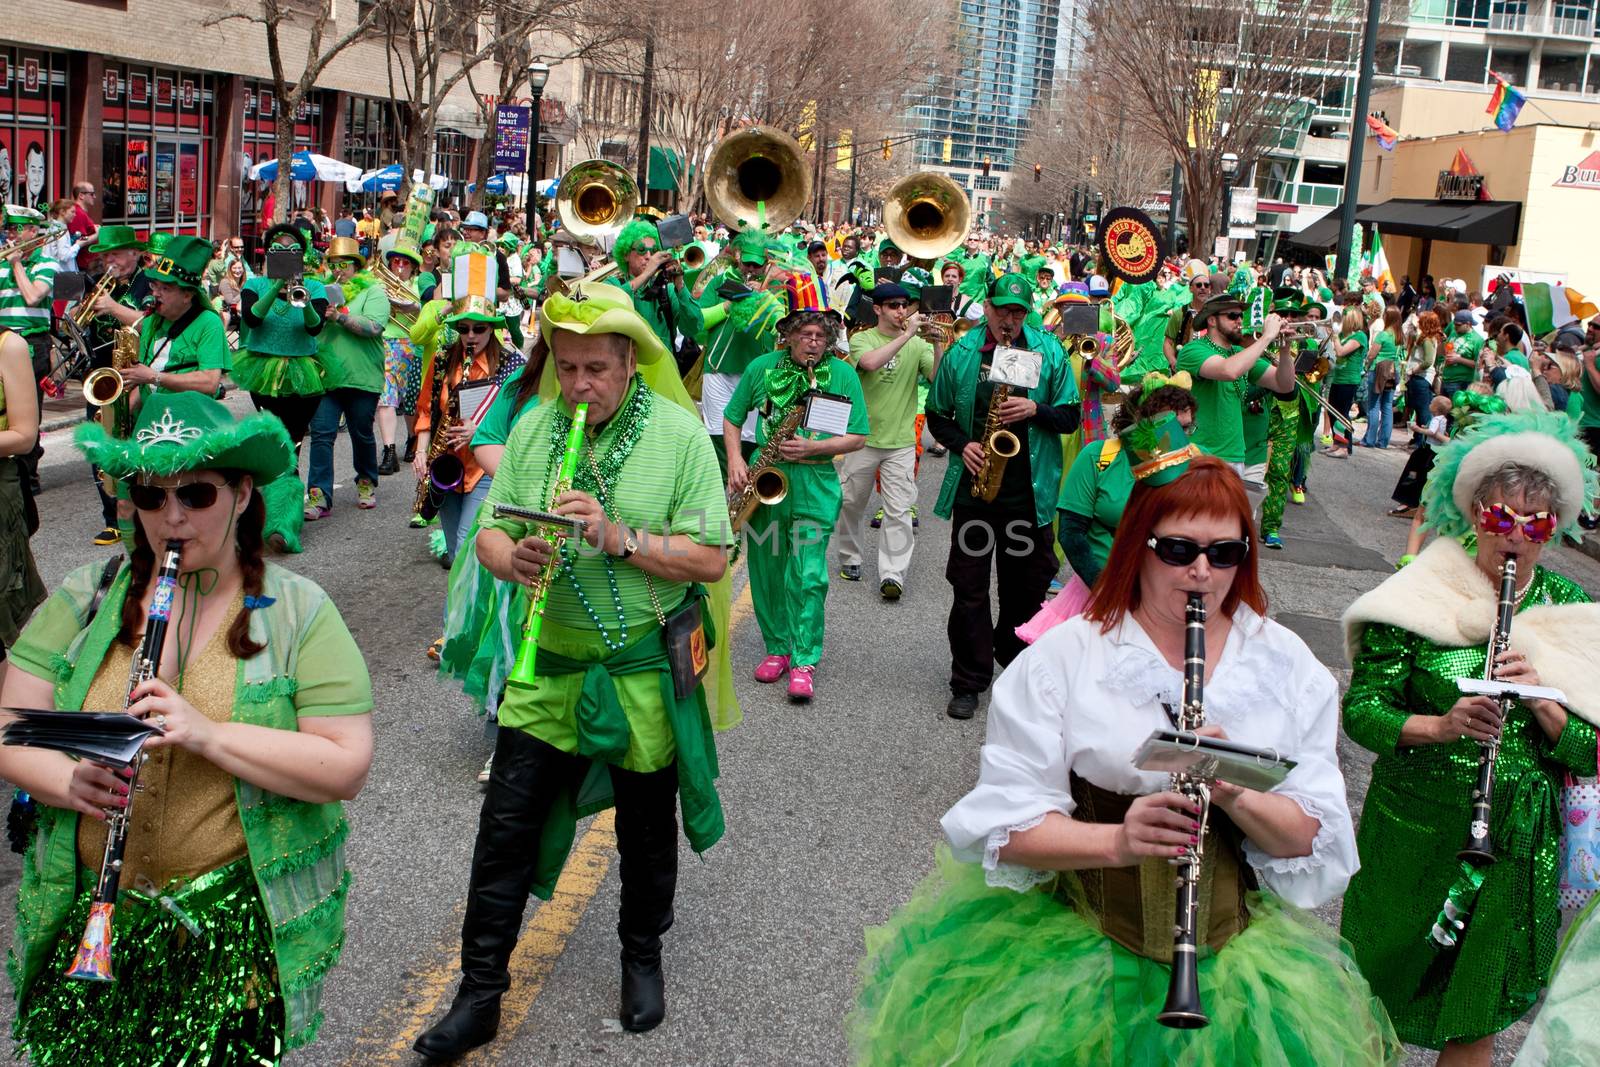 Eclectic Band In Green Plays In St. Patrick's Parade by BluIz60